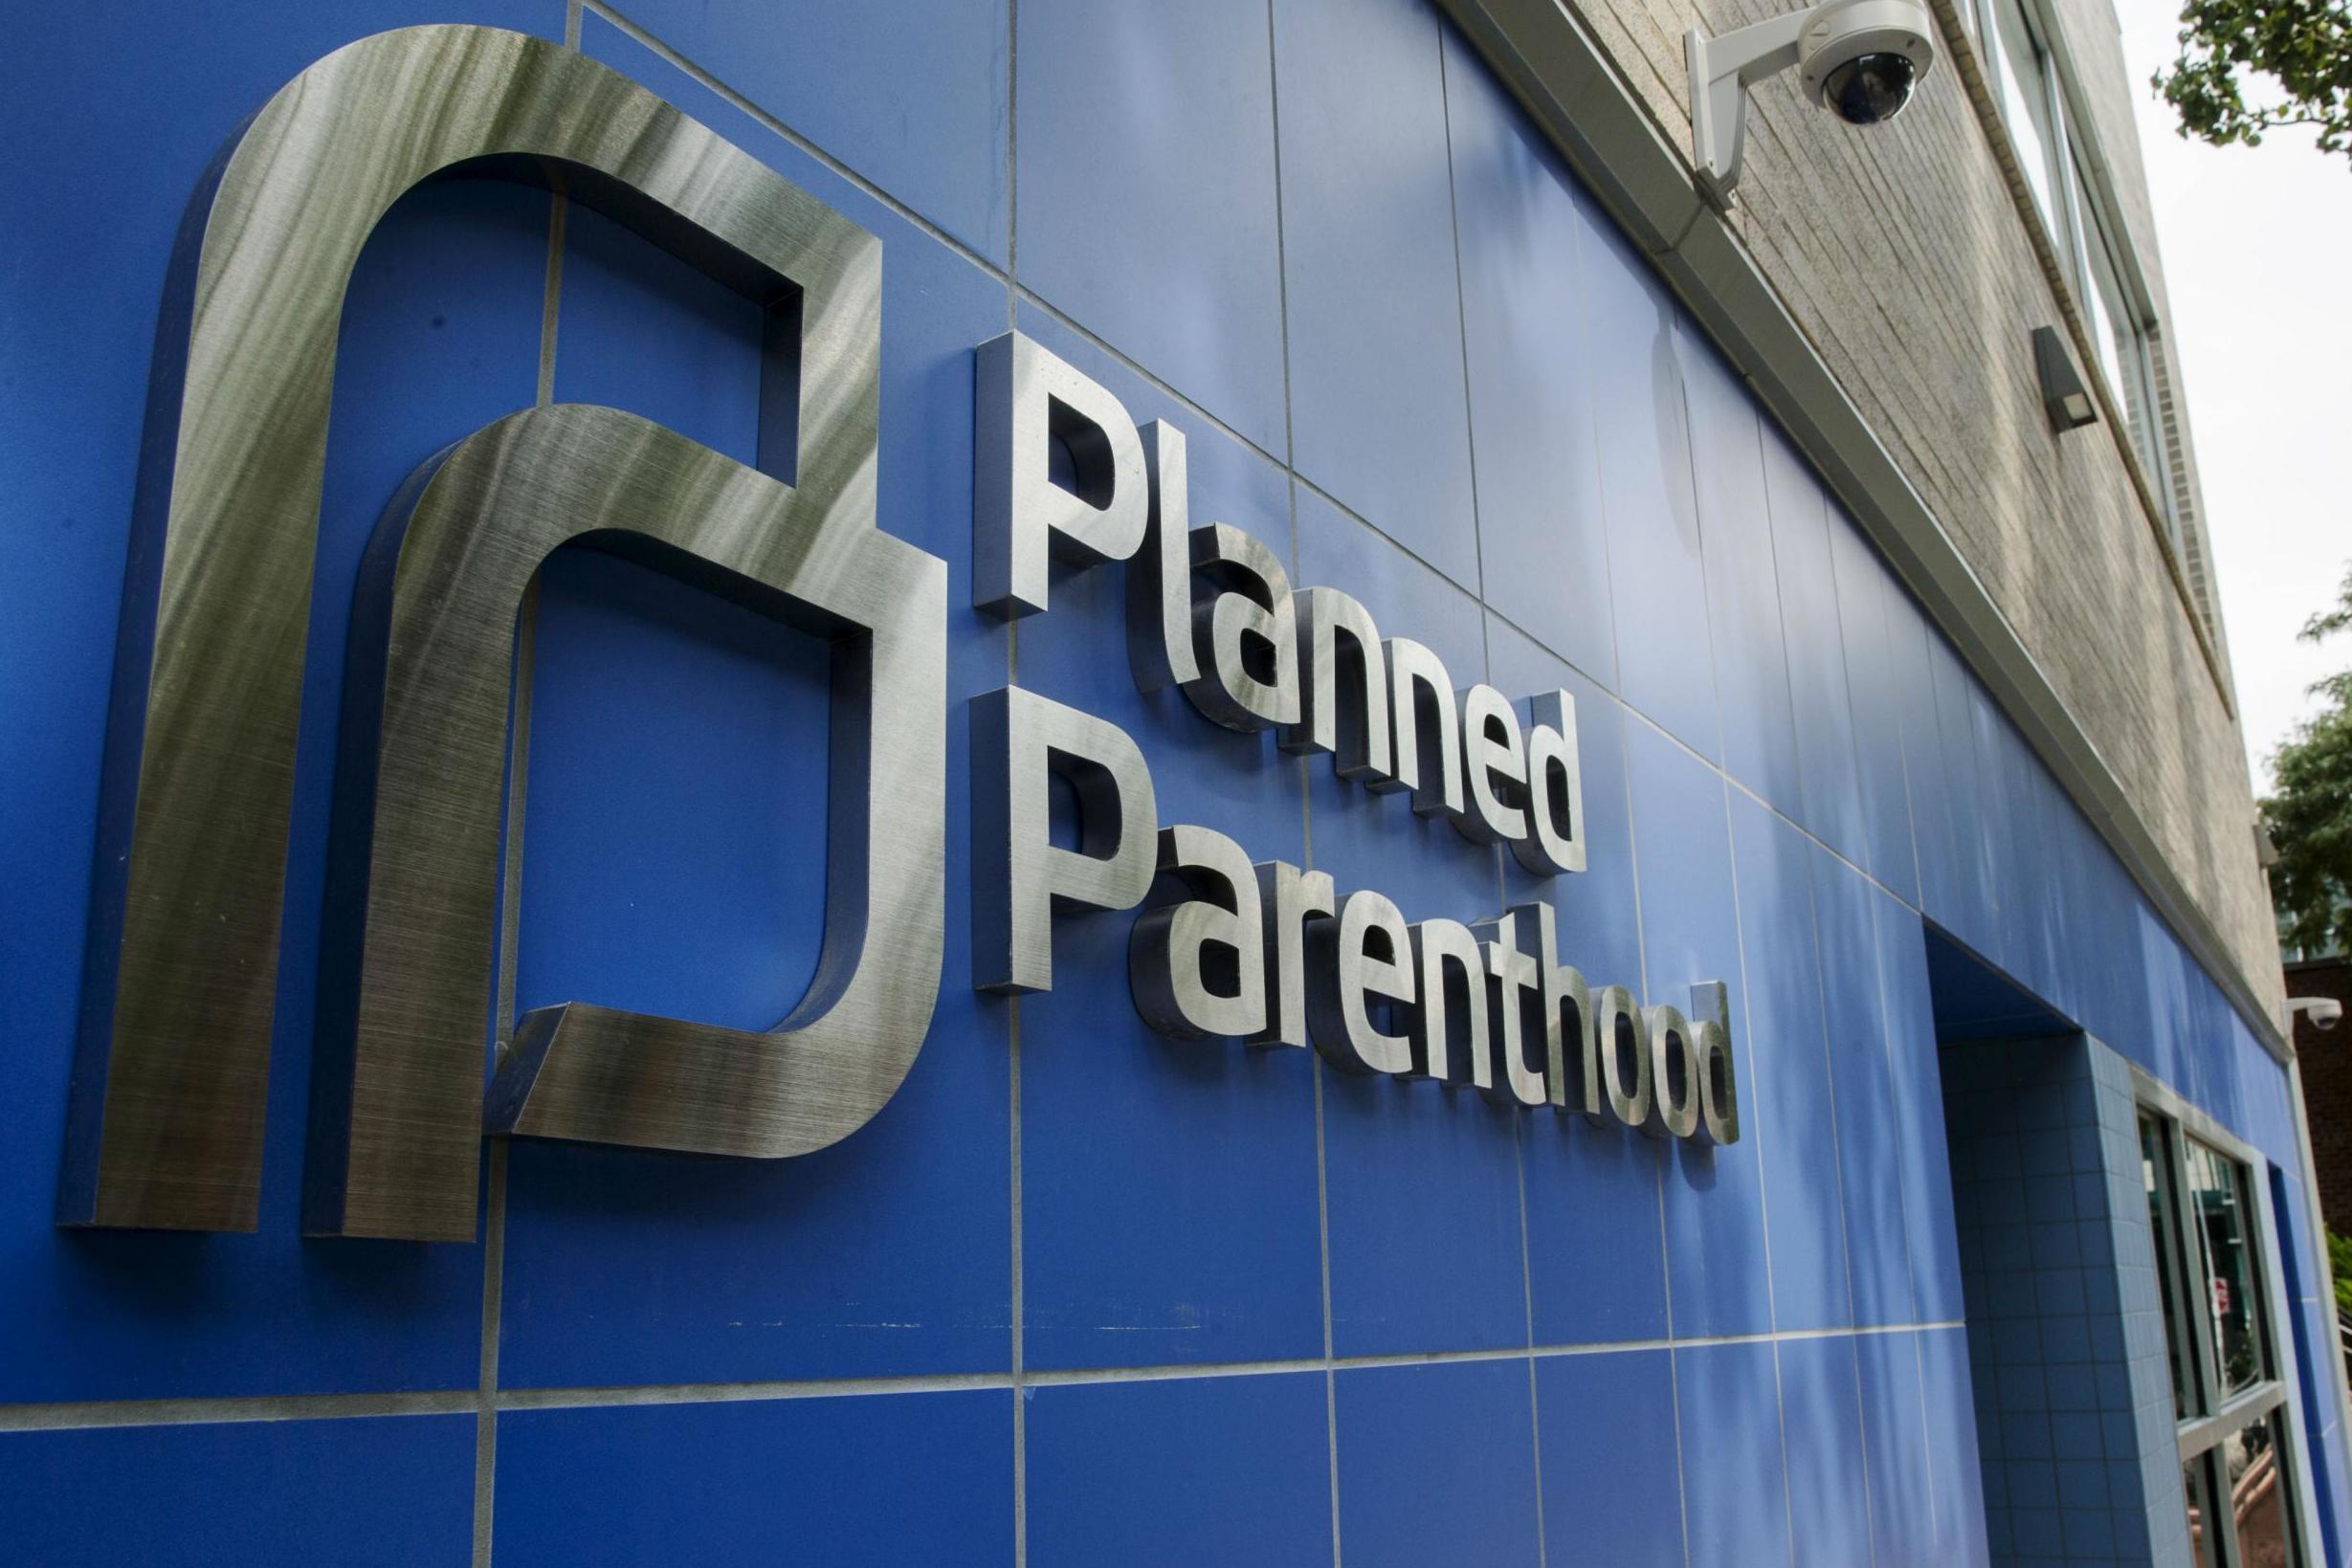 Officials at Planned Parenthood said they had received an increase in queries about access to contraception